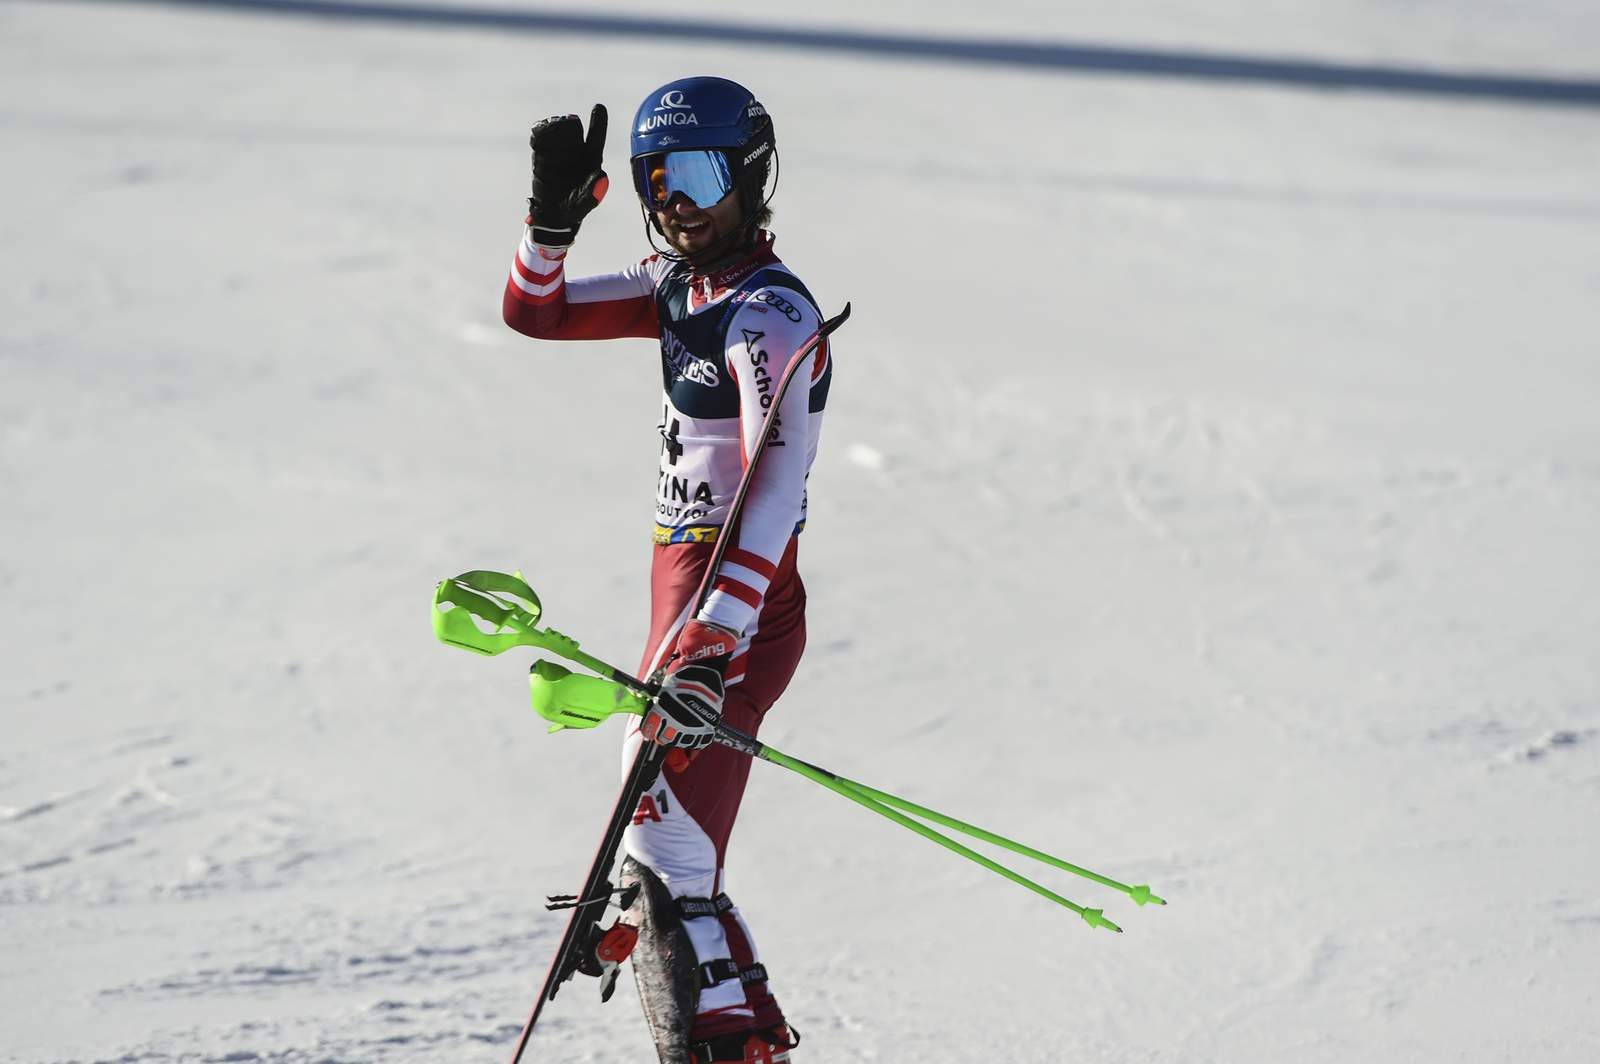 The Latest: Schwarz inspired by Kriechmayr at skiing worlds